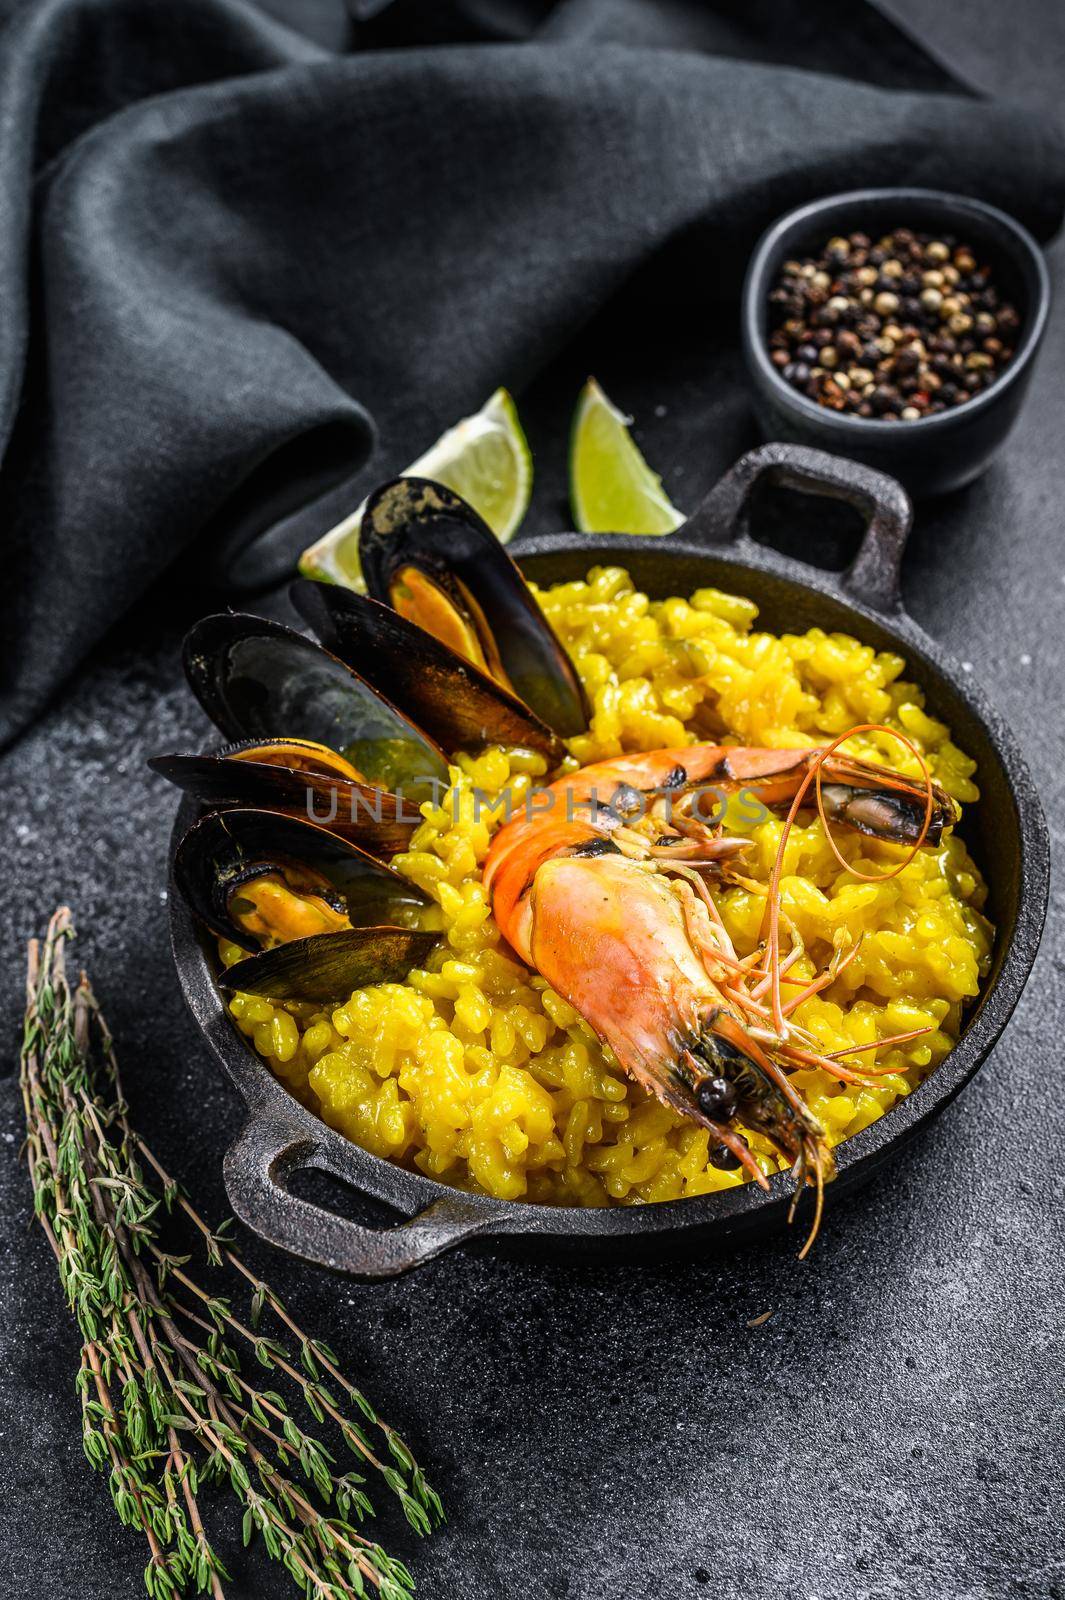 The Spanish paella with seafood prawns, shrimps, mussels. Black background. Top view.